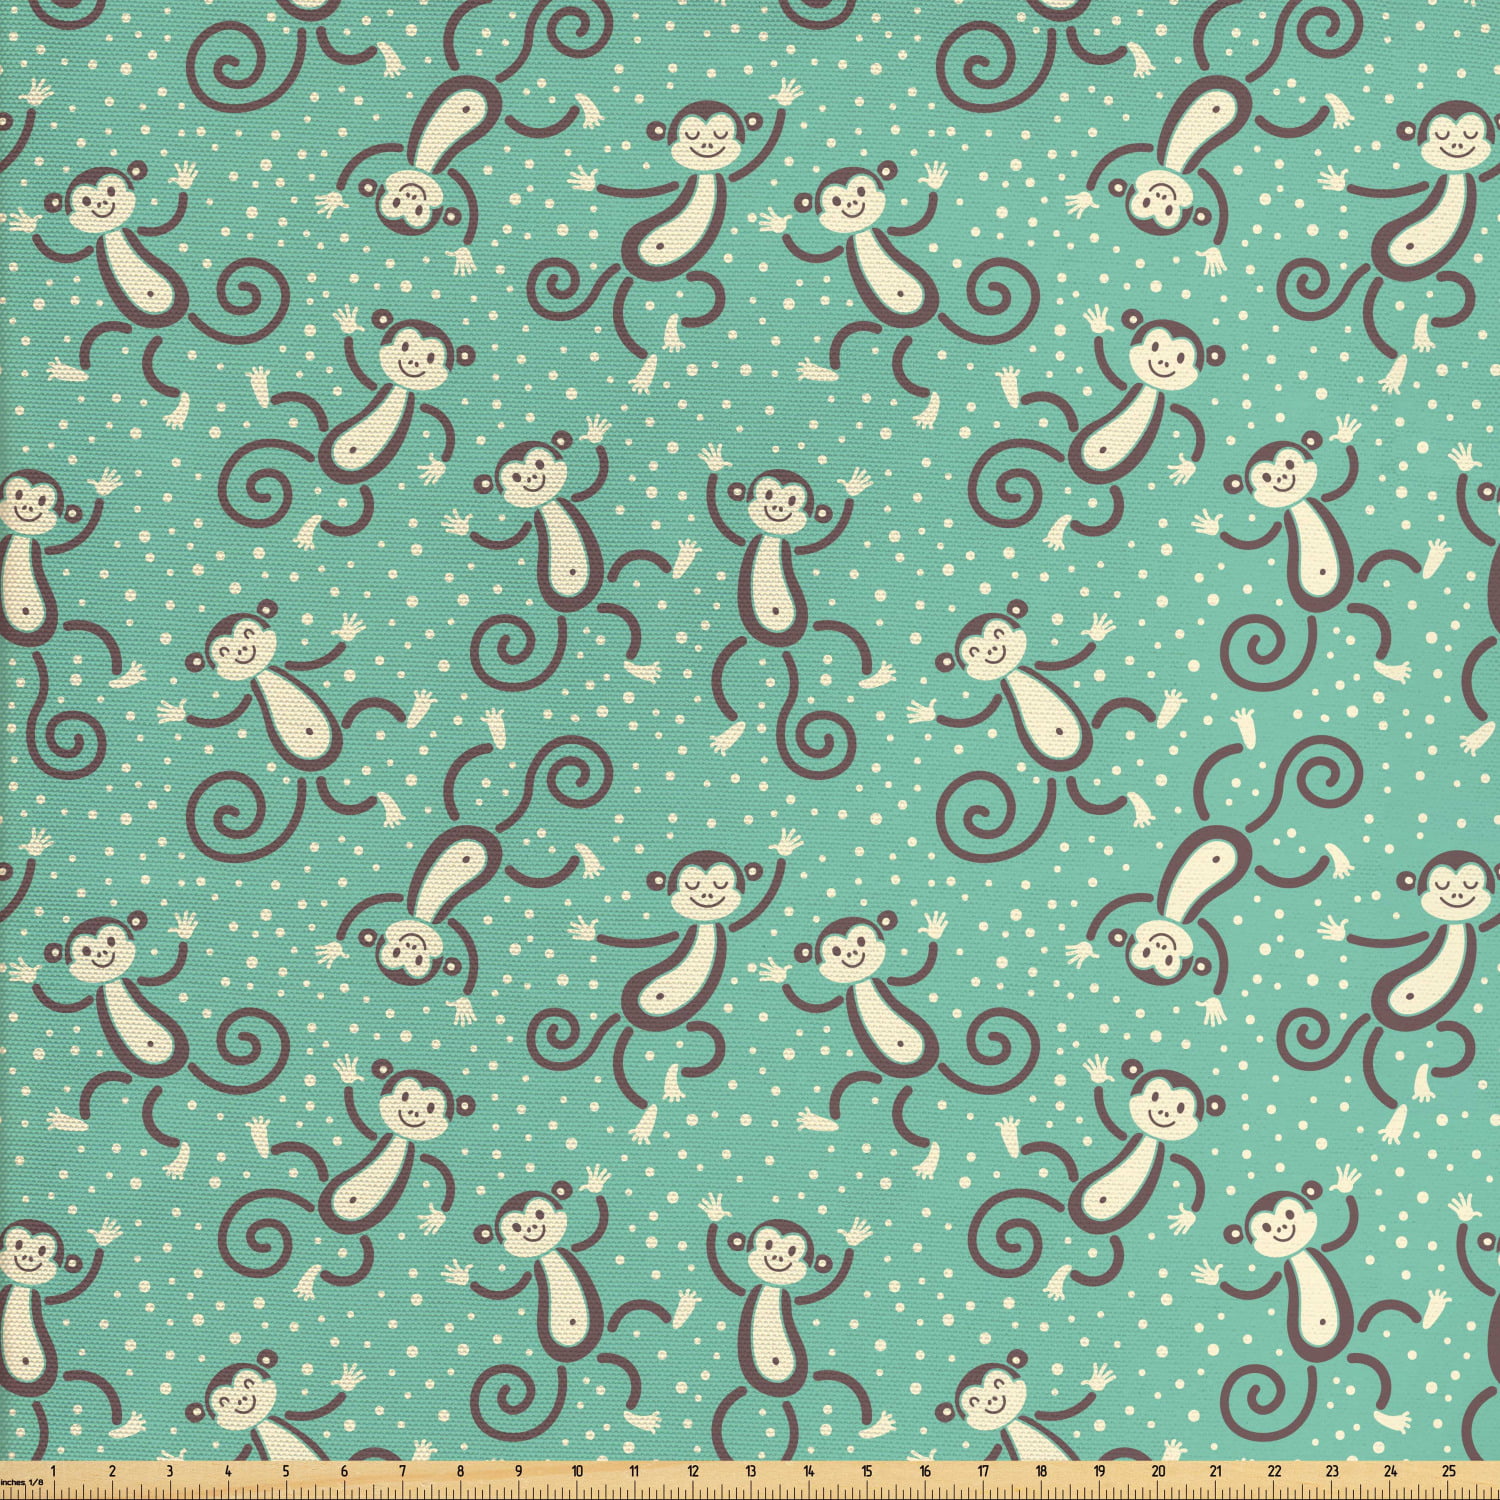 Monkeys Fabric by The Yard, Funny Creatures with Curling Tails on a ...